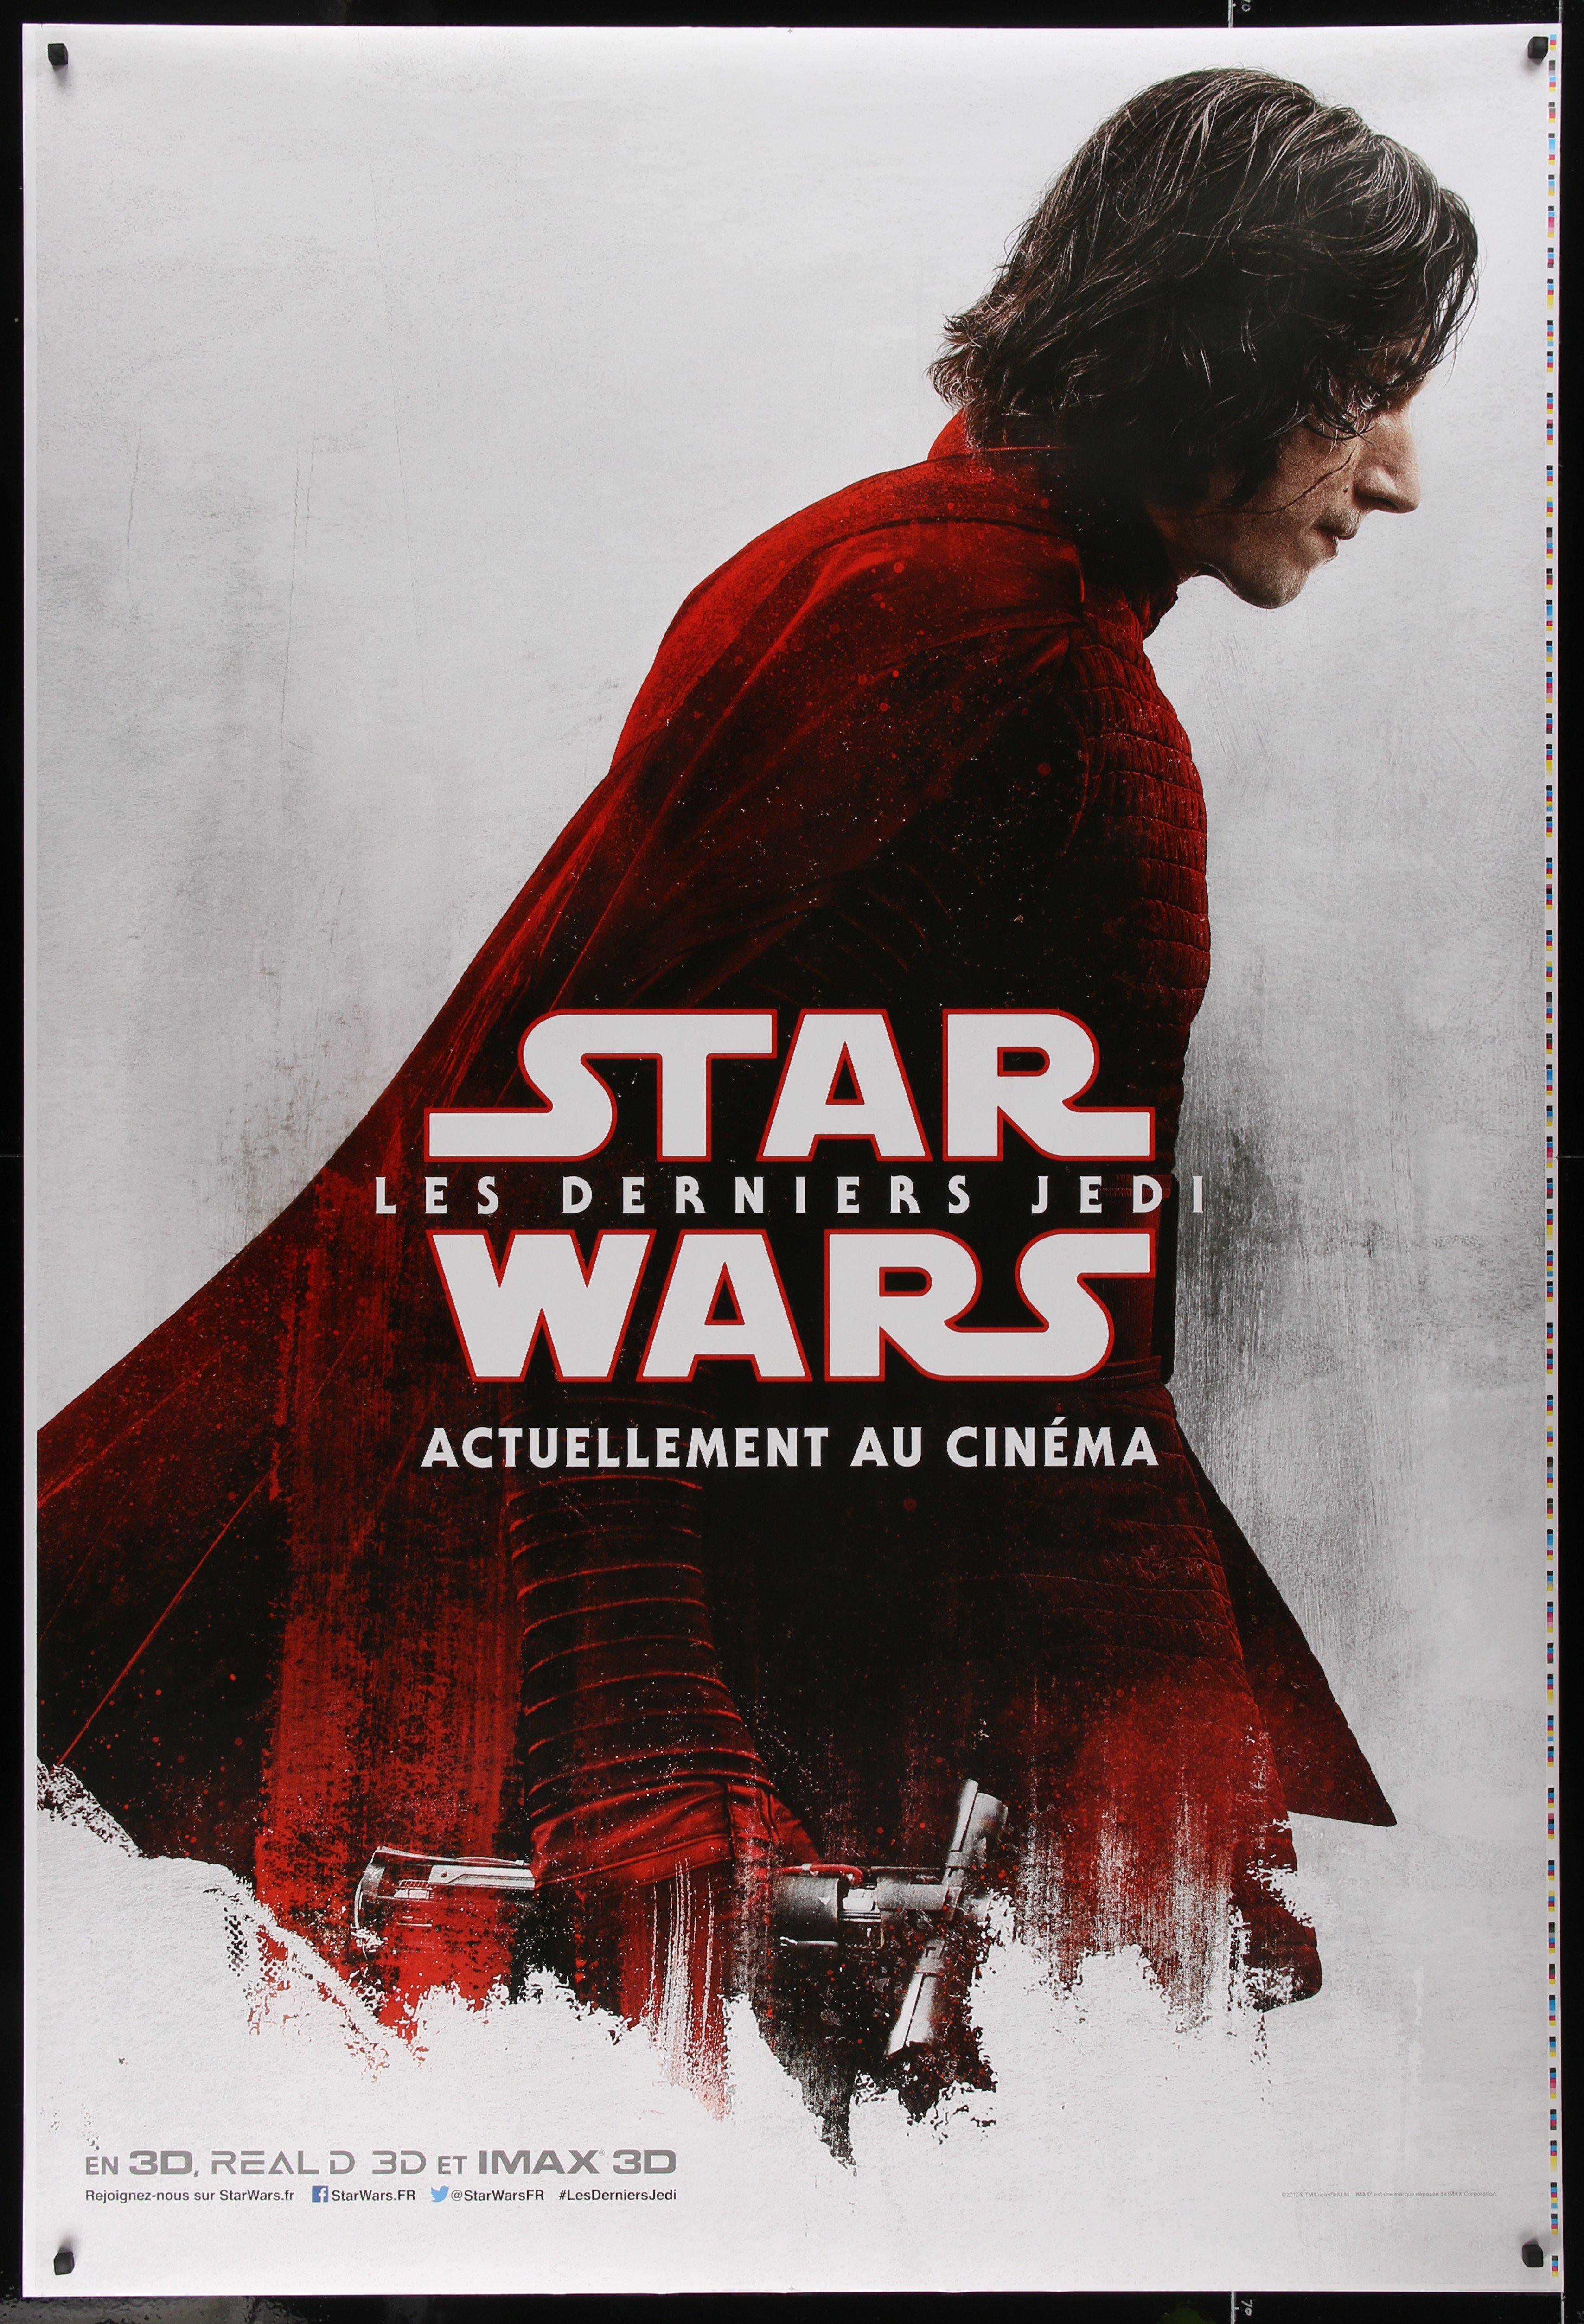 New Character Posters Released For Star Wars: The Last Jedi